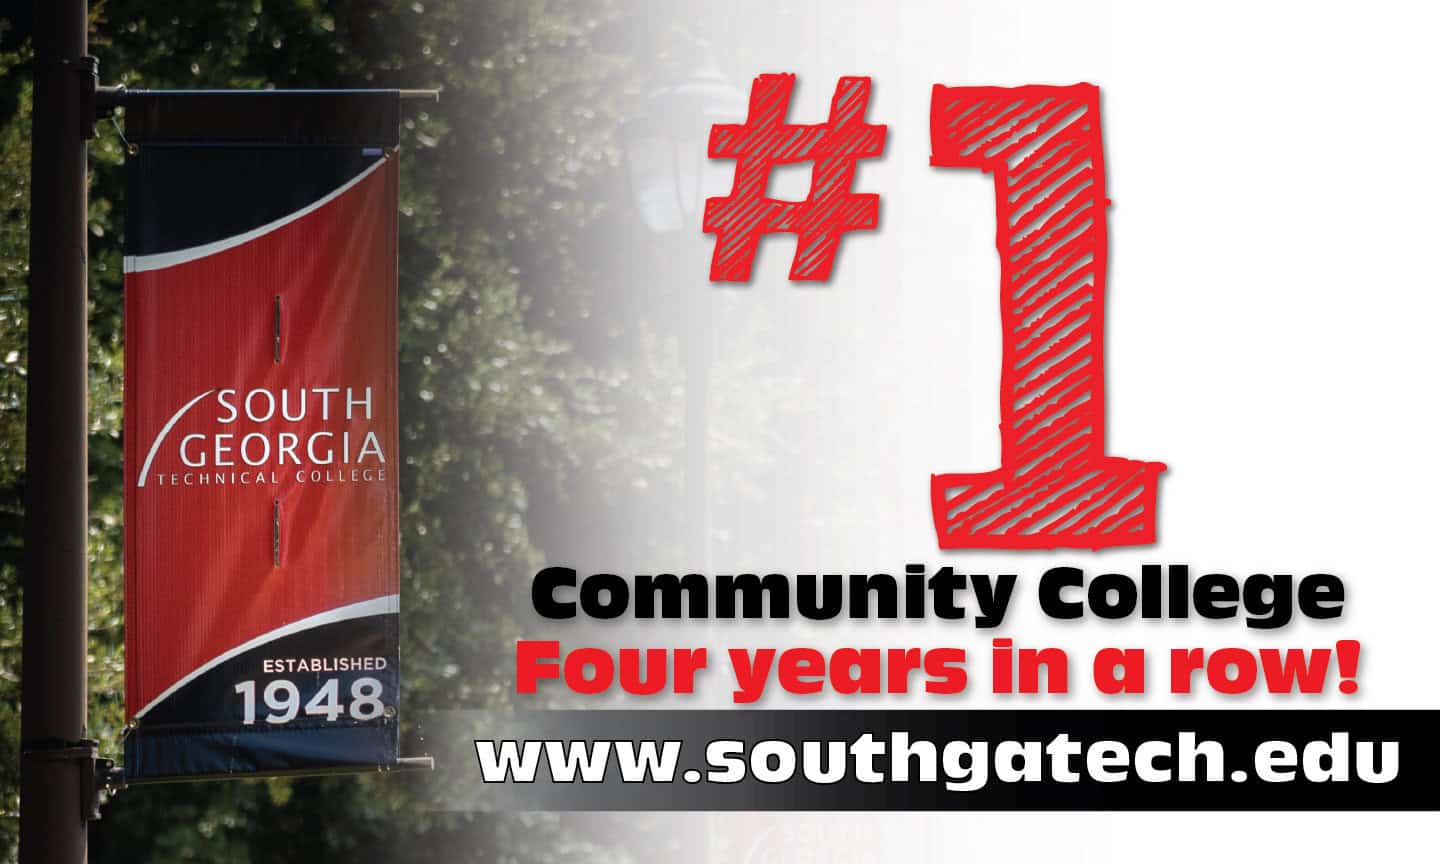 South Georgia Technical College is “Bridging the Gap” for workforce education. Enroll today for Summer Semester. SGTC has been ranked as the top community college in Georgia for four consecutive years.